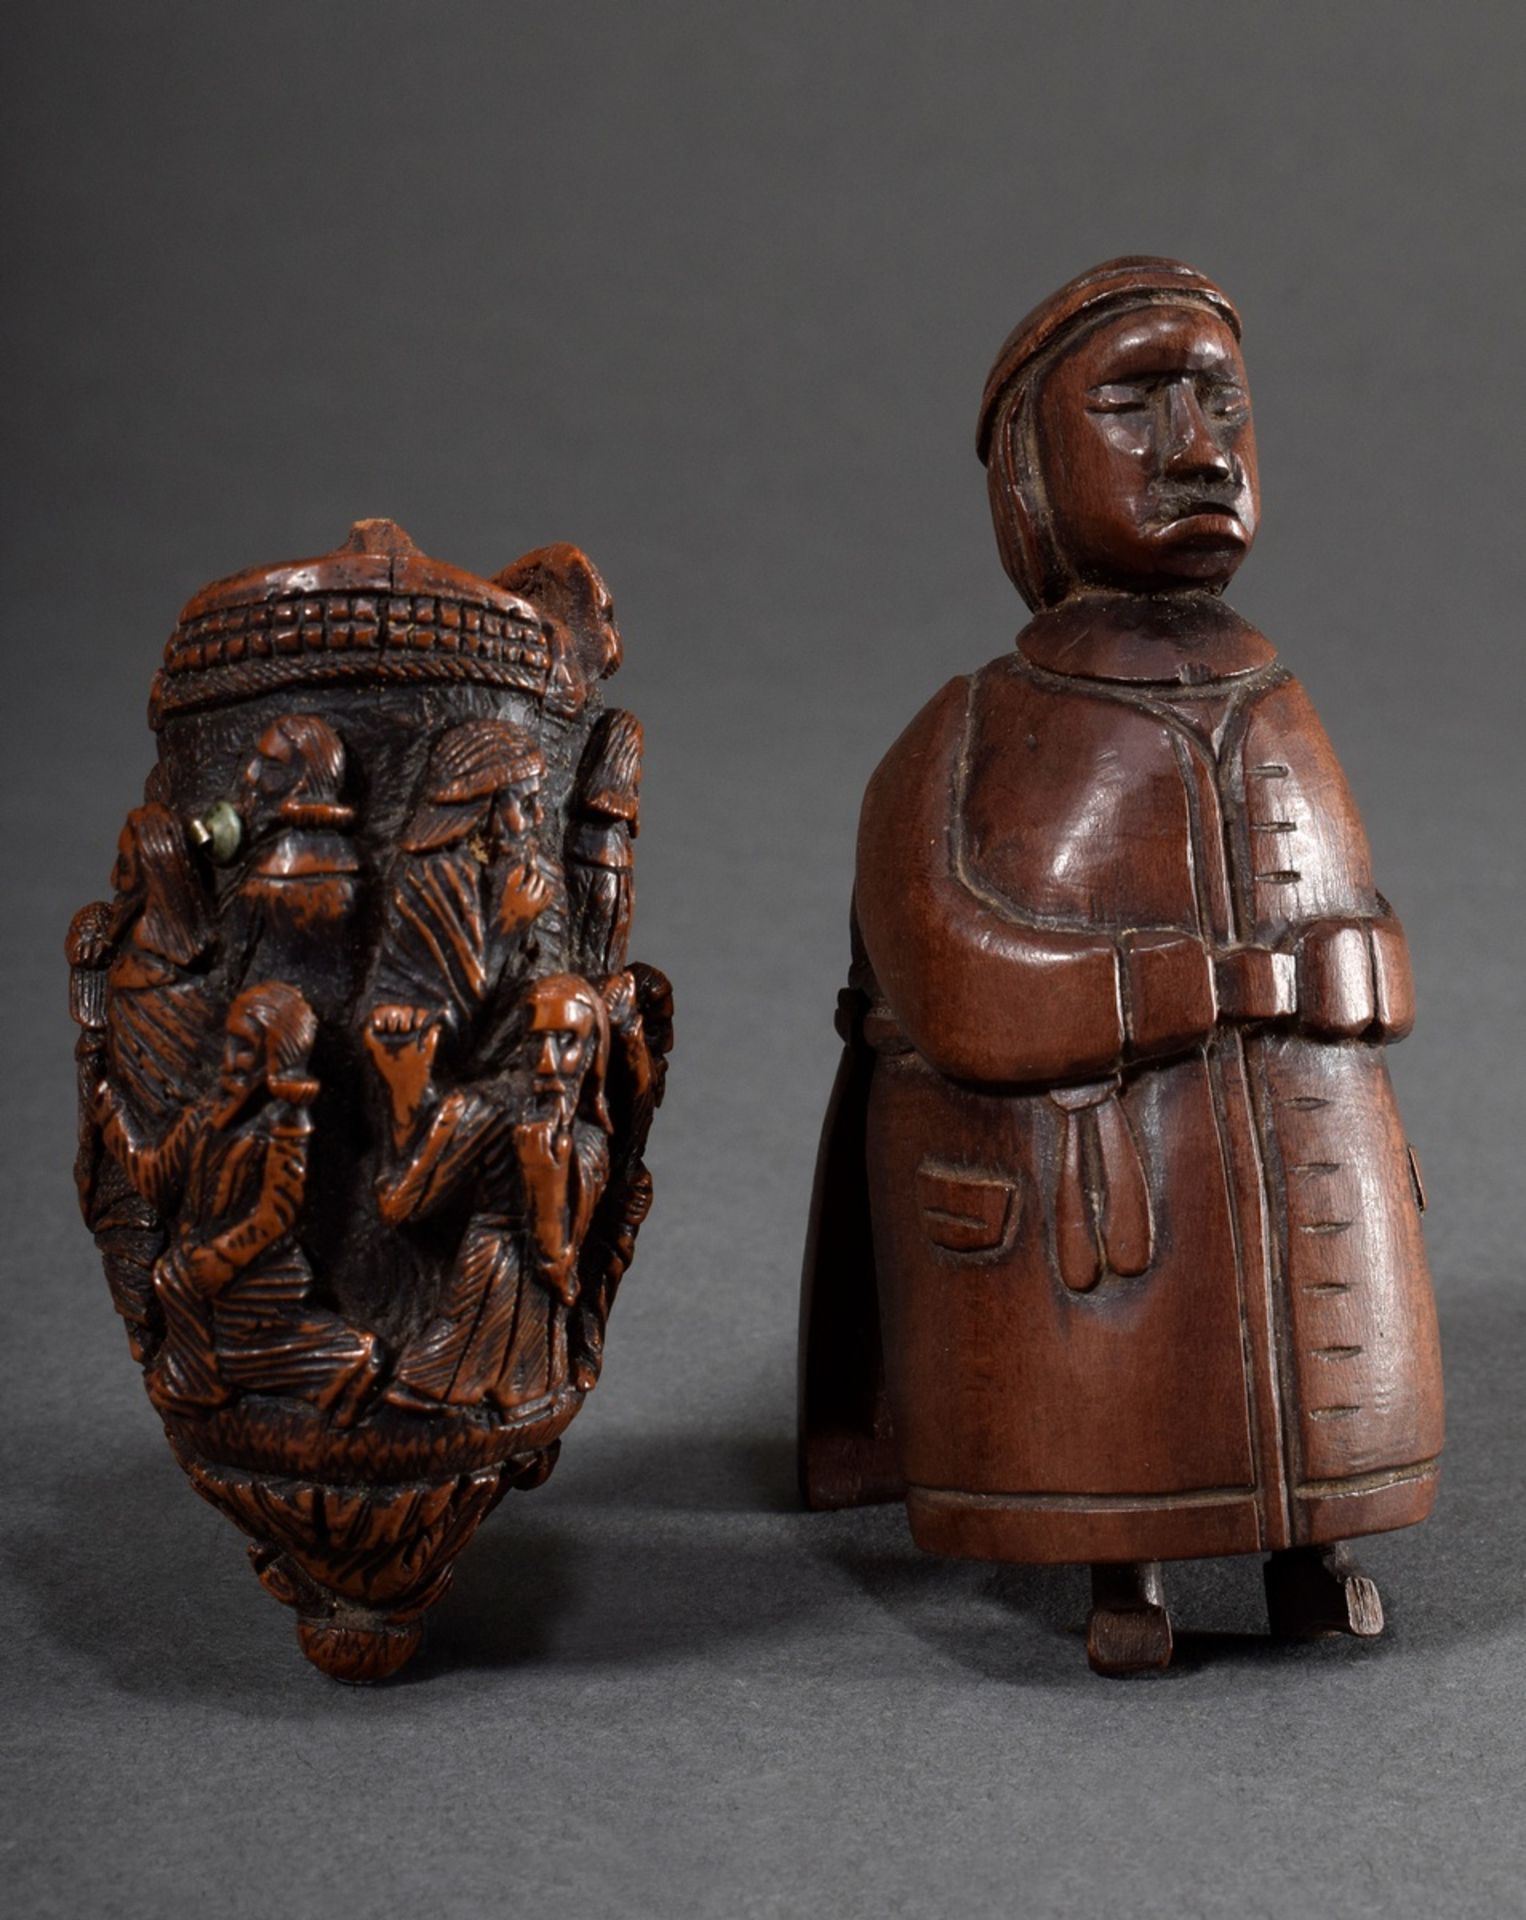 2 Various carved wooden and corozo nut snuffboxes "Clergyman" and "Scene from the Passion of Christ